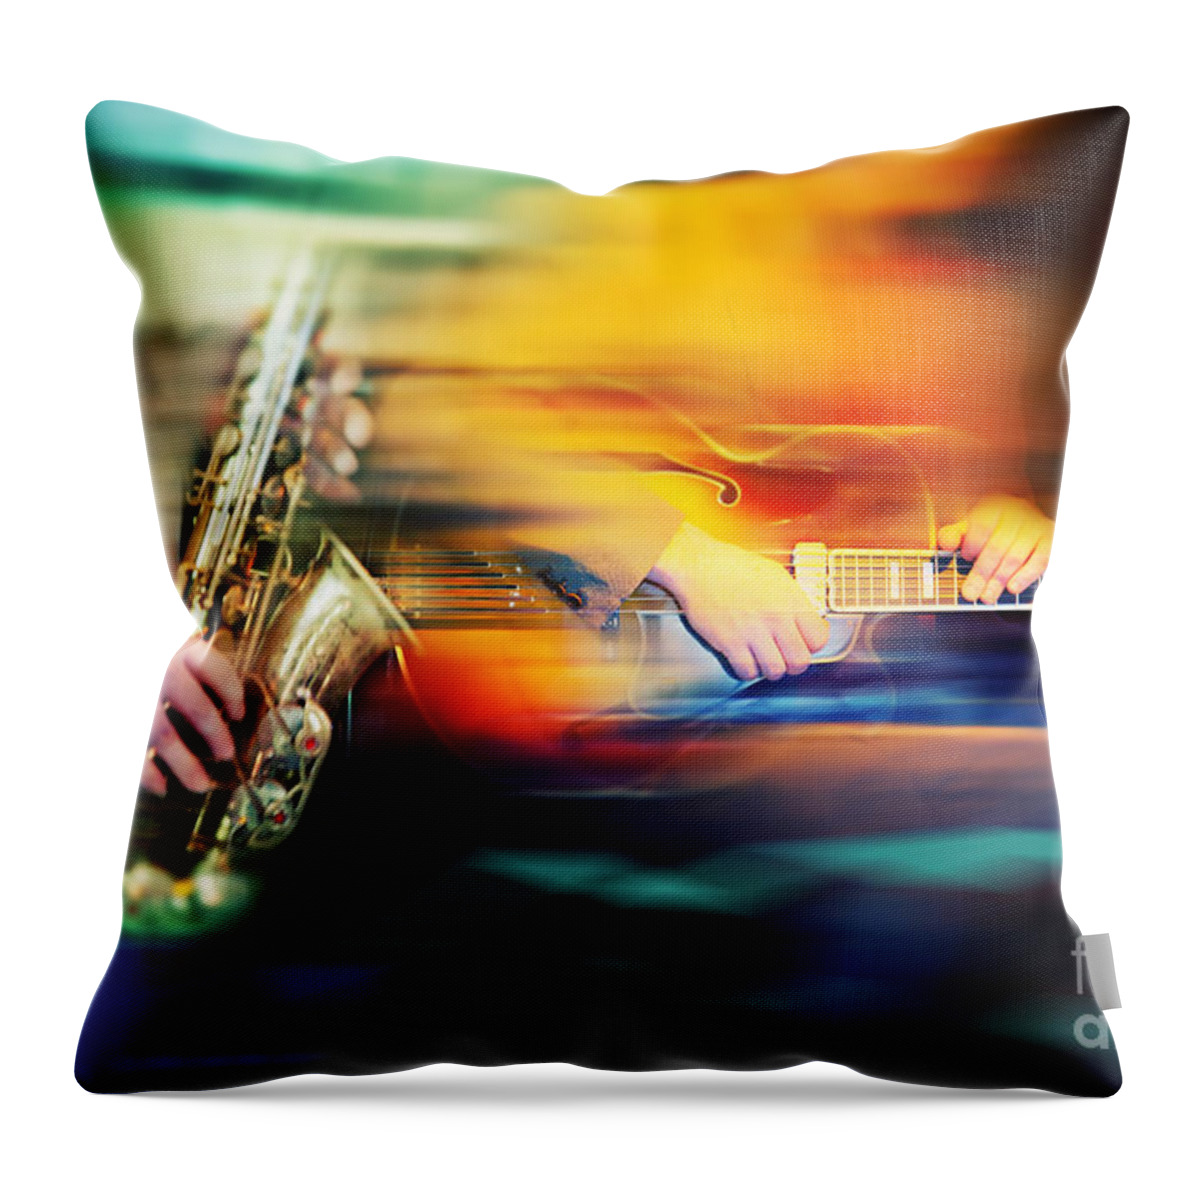 Jazz Throw Pillow featuring the photograph Basic Jazz Instruments by Ariadna De Raadt